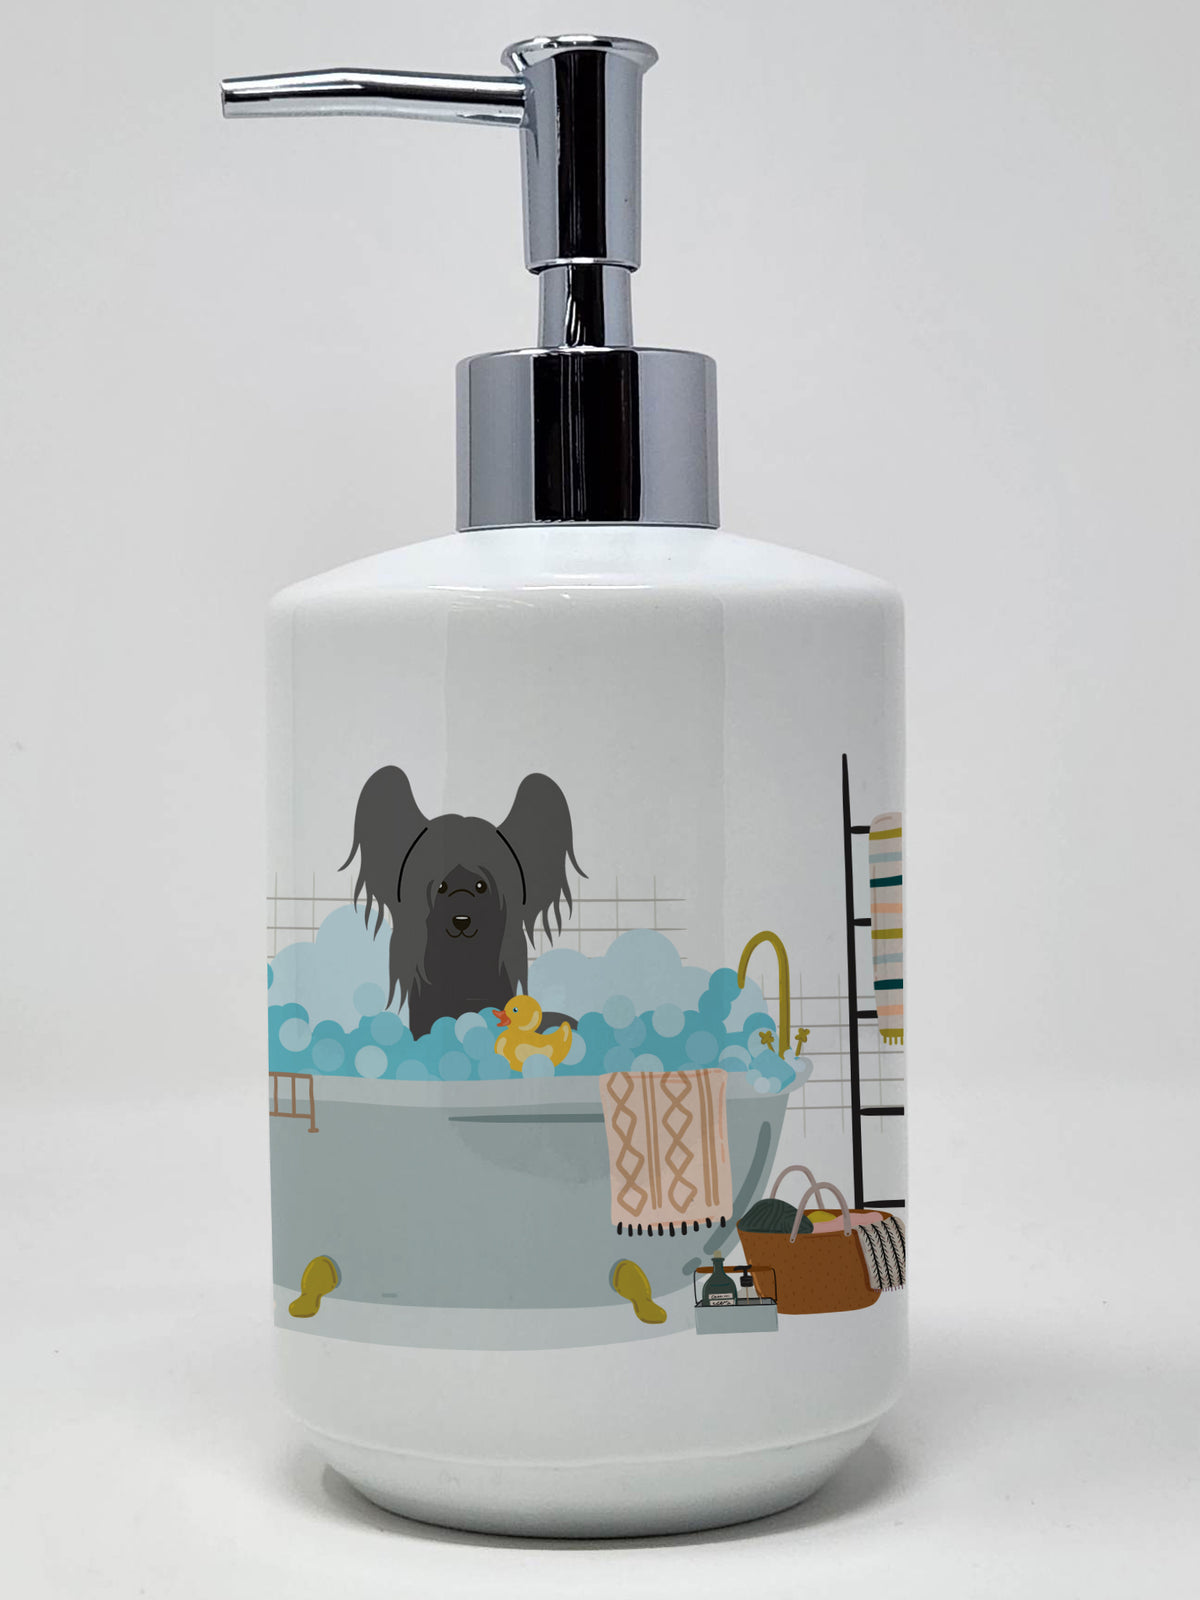 Buy this Black Chinese Crested in Bathtub Ceramic Soap Dispenser